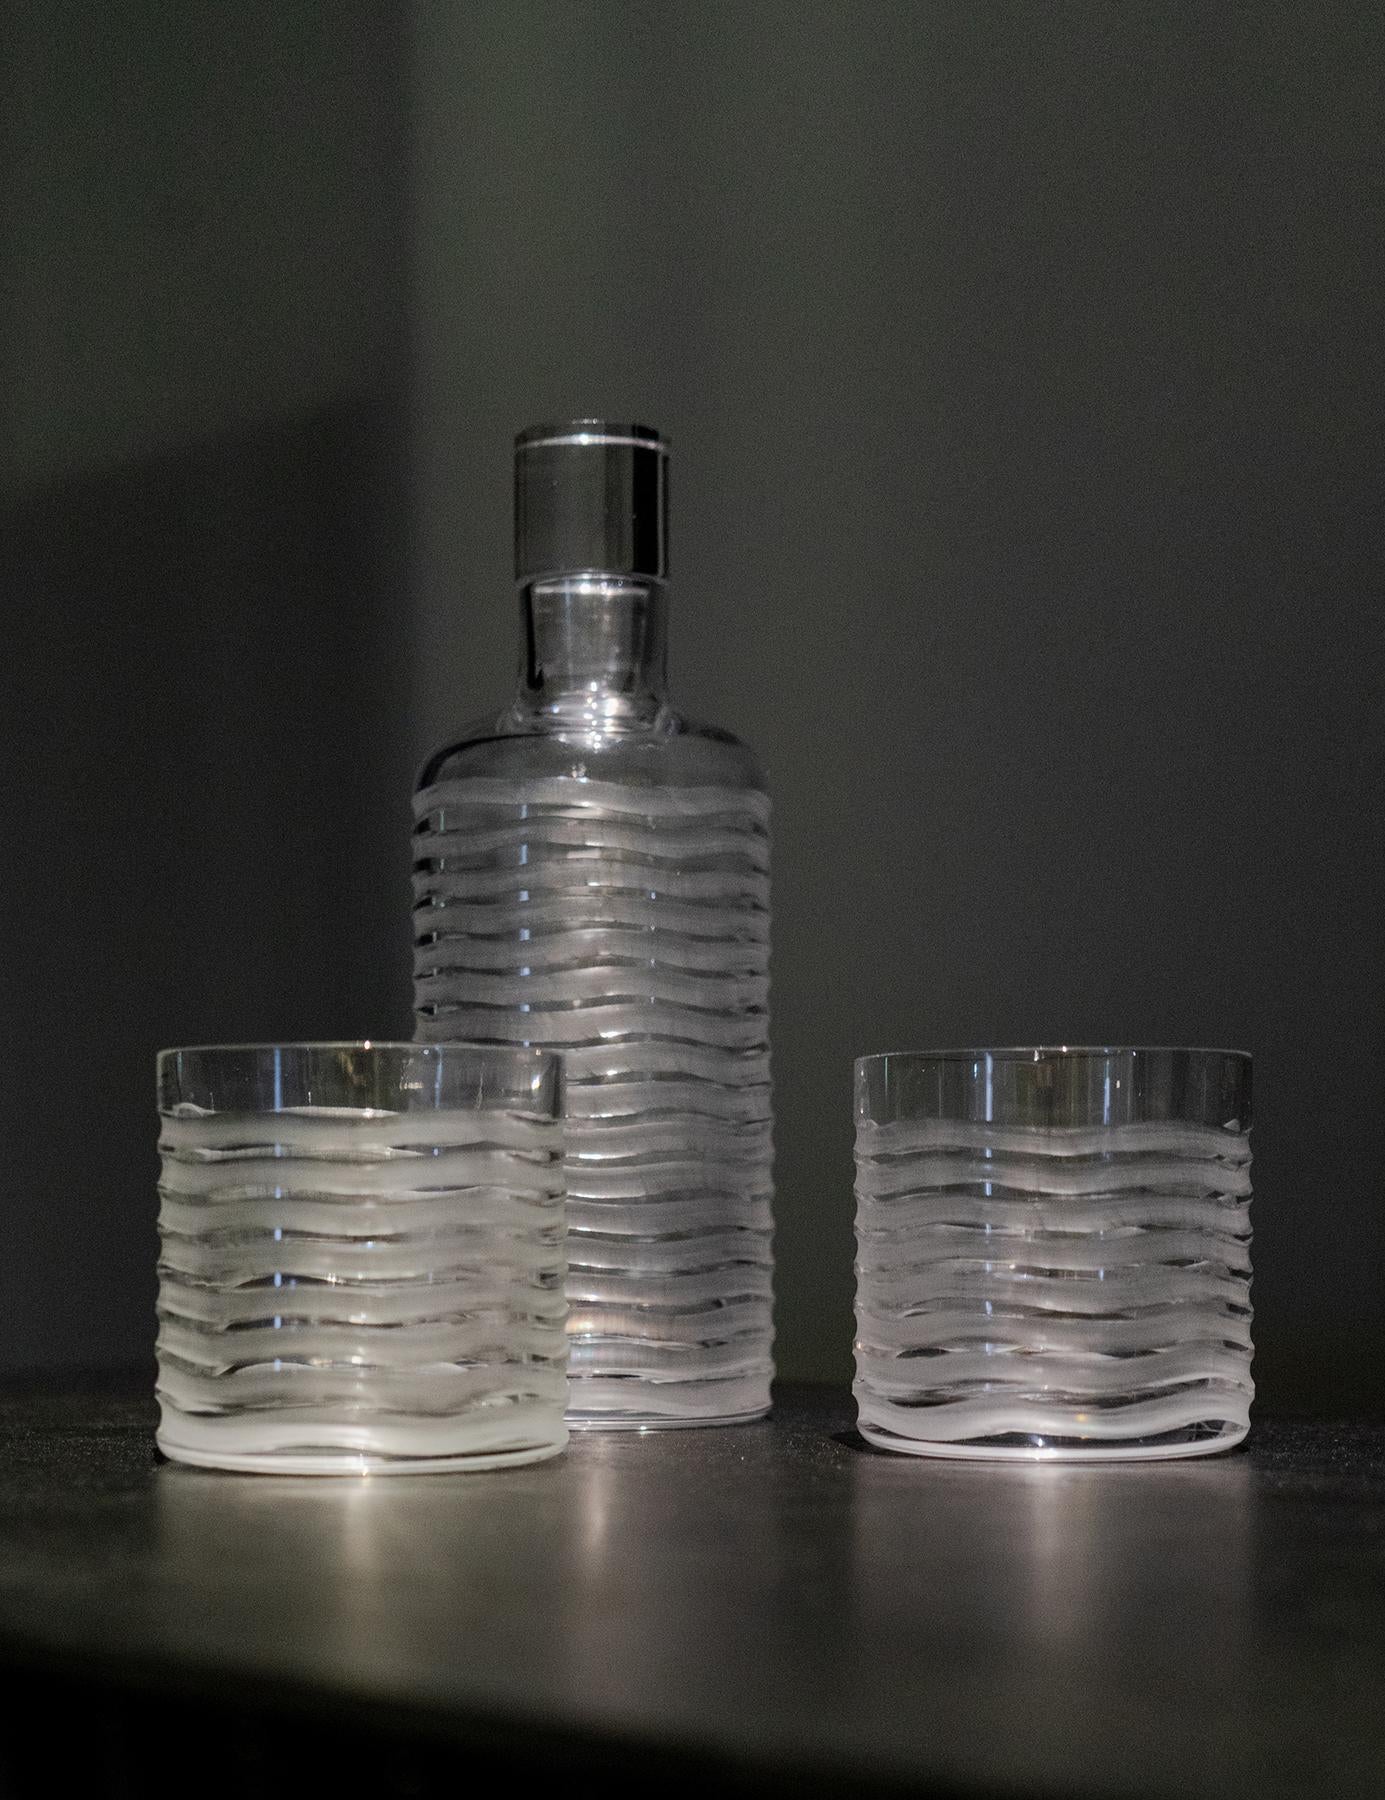 The 'Well' collection was conceived to elevate and celebrate drinking water in a vessel worthy of its importance. In collaboration with Italian crystal company Mario Cioni, Designer Corinna Warm created a unique, handcrafted, mouth blown, cut